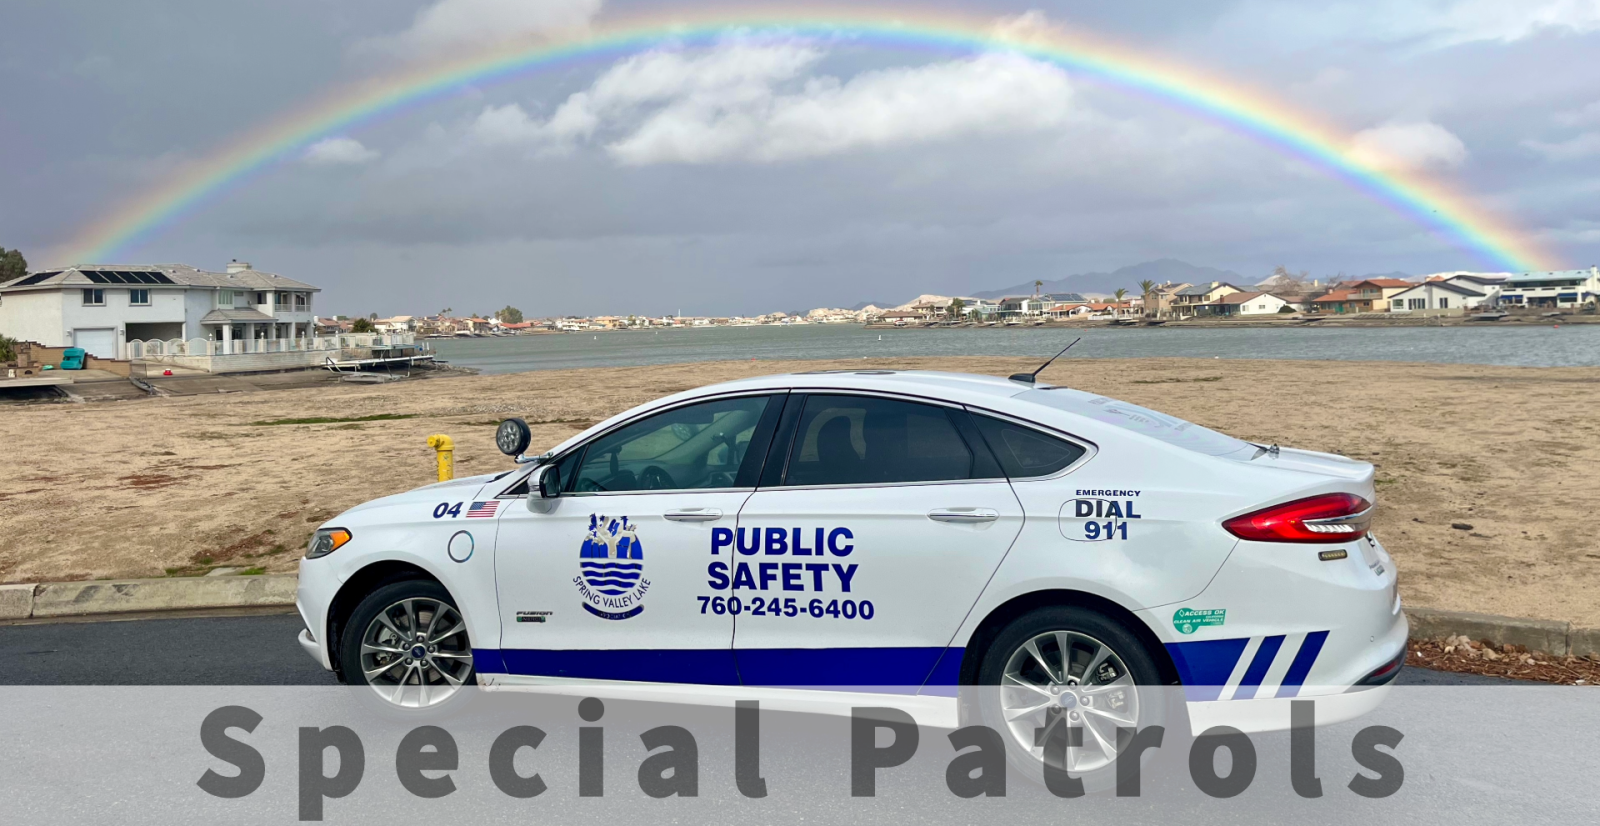 PSD car under rainbow with lake SVL lake in the background